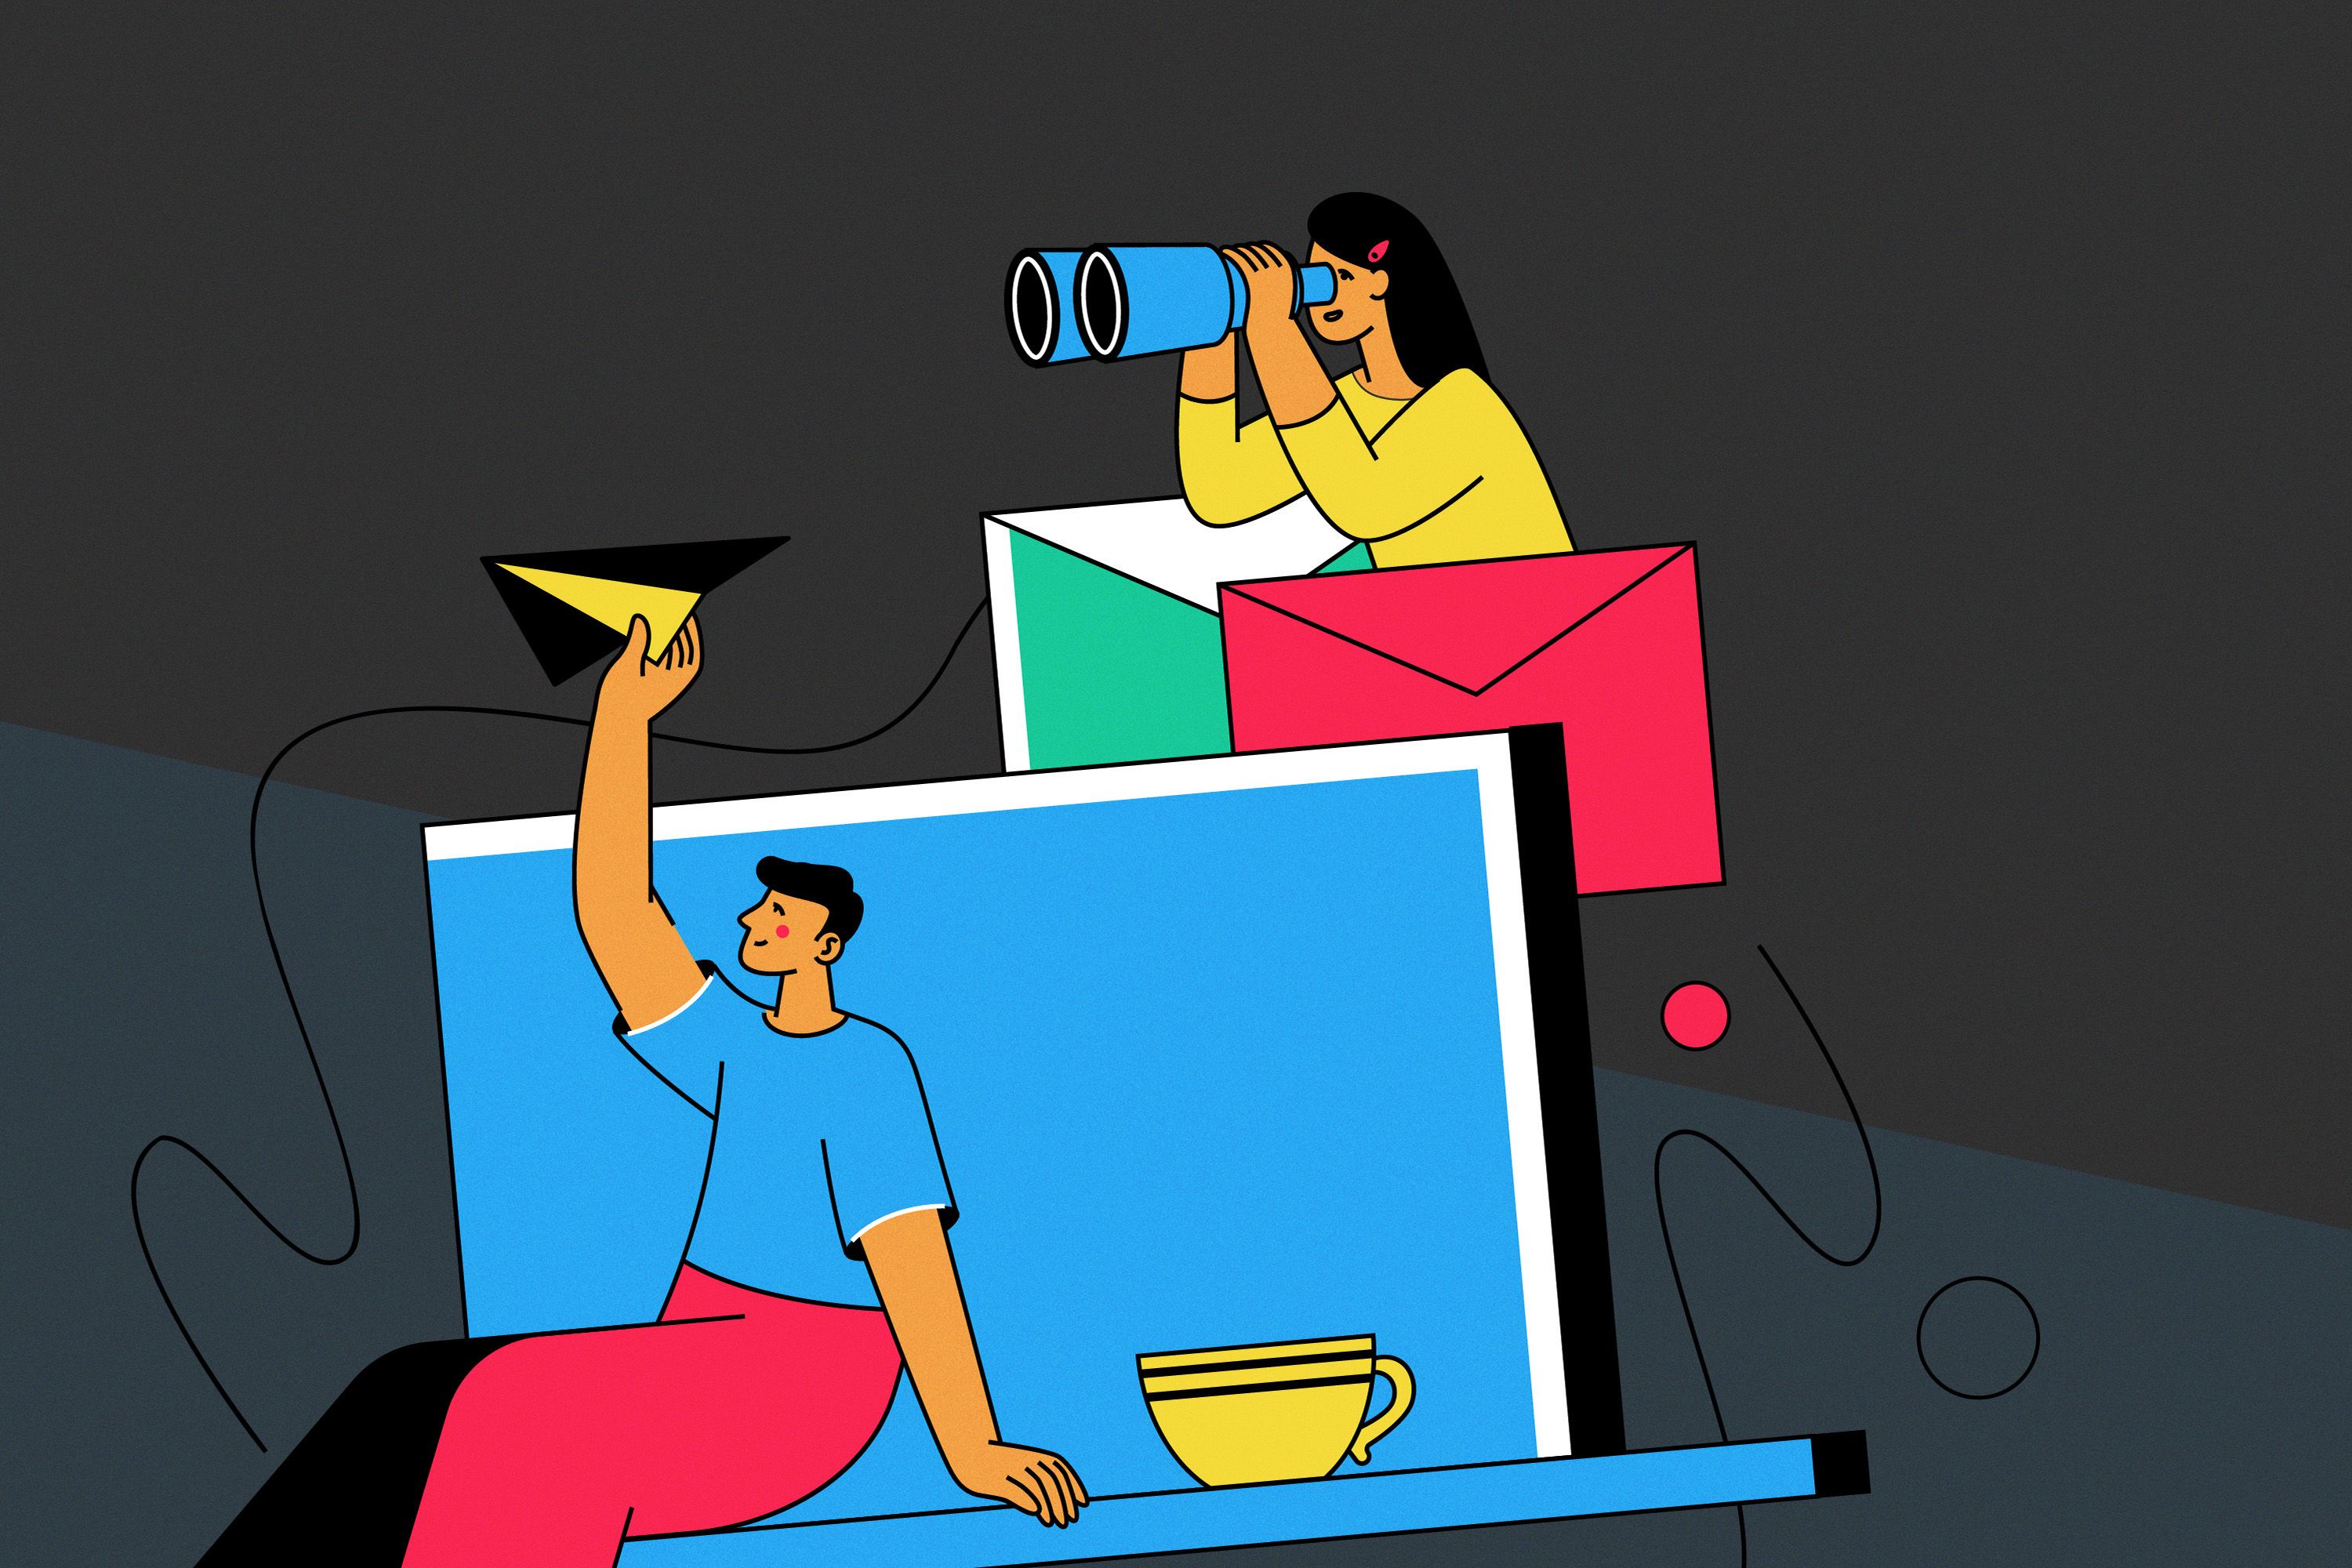 An illustration of two people. One holding a paper plane and the other holding binoculars. It is bright and colourful.